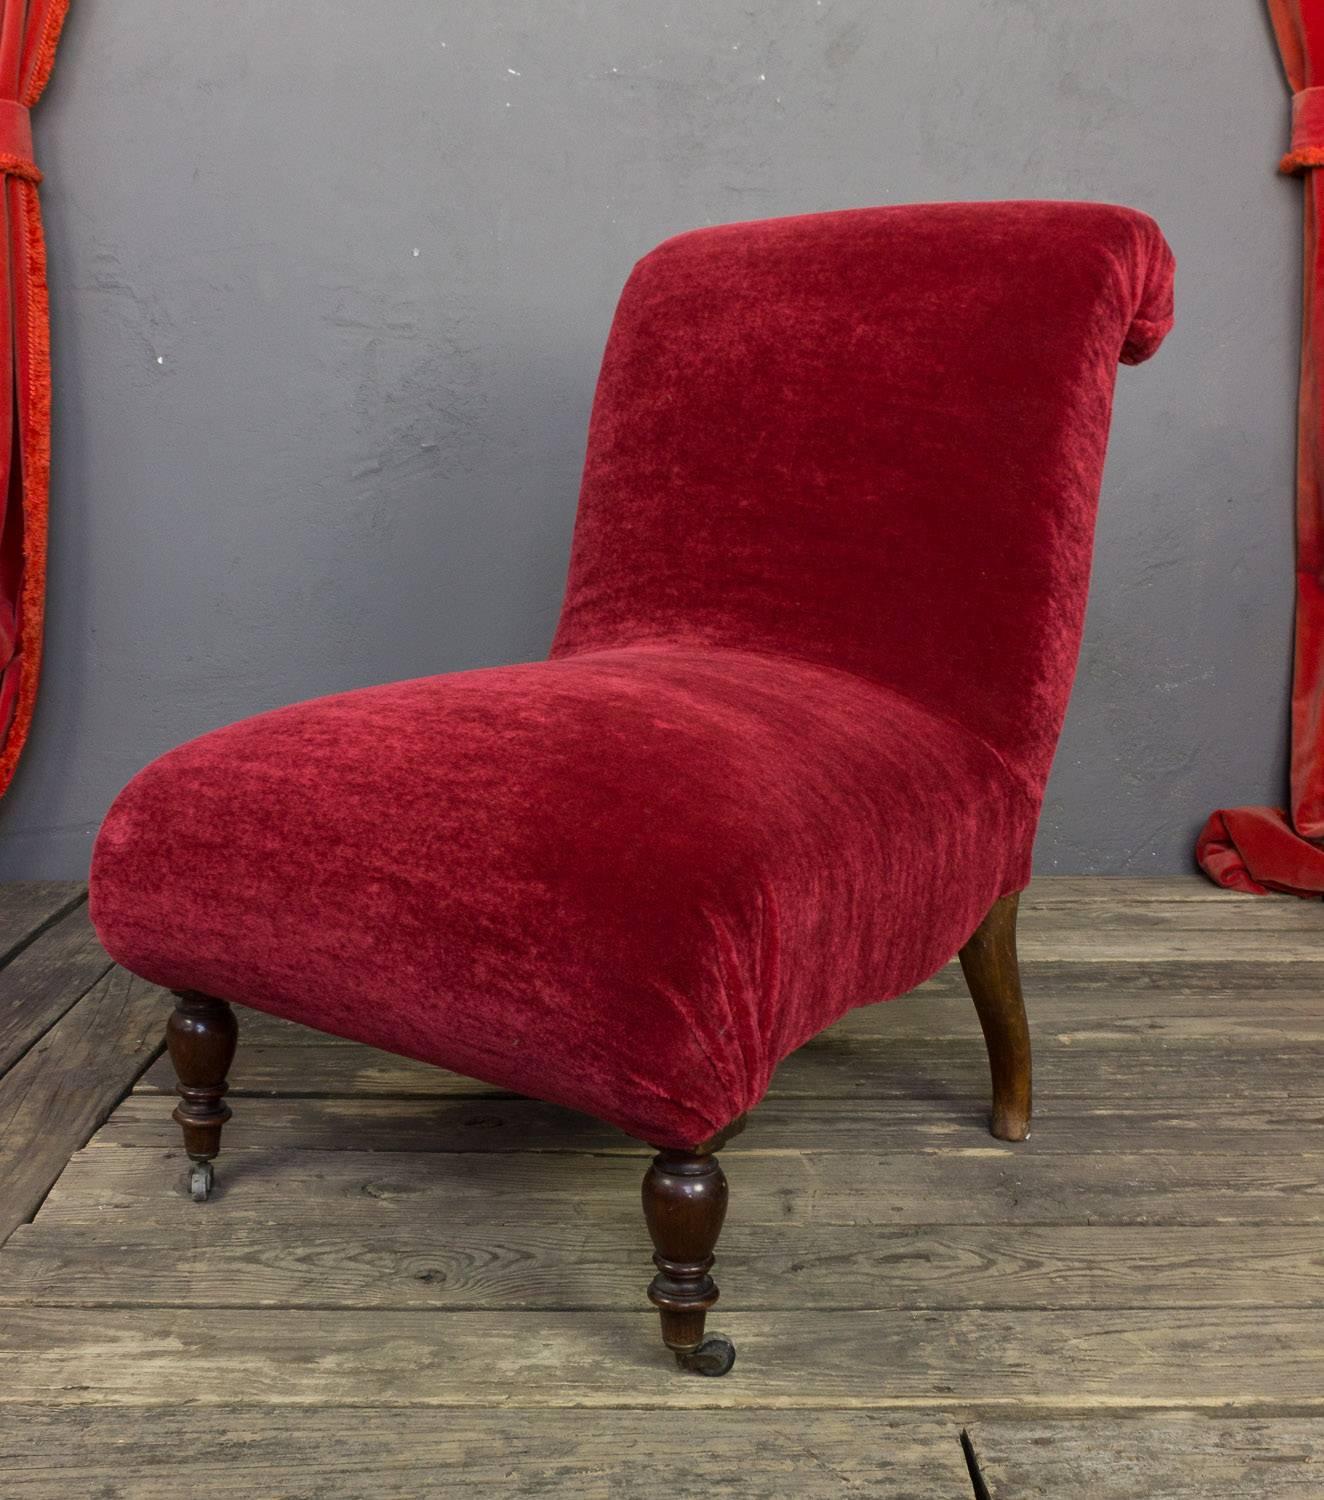 An elegant Spanish mid 19th century scrollback slipper chair. With its rich red mohair upholstery, this slipper chair is sure to be a standout in any room or setting. Recently upholstered, it is still in very good vintage condition, providing years